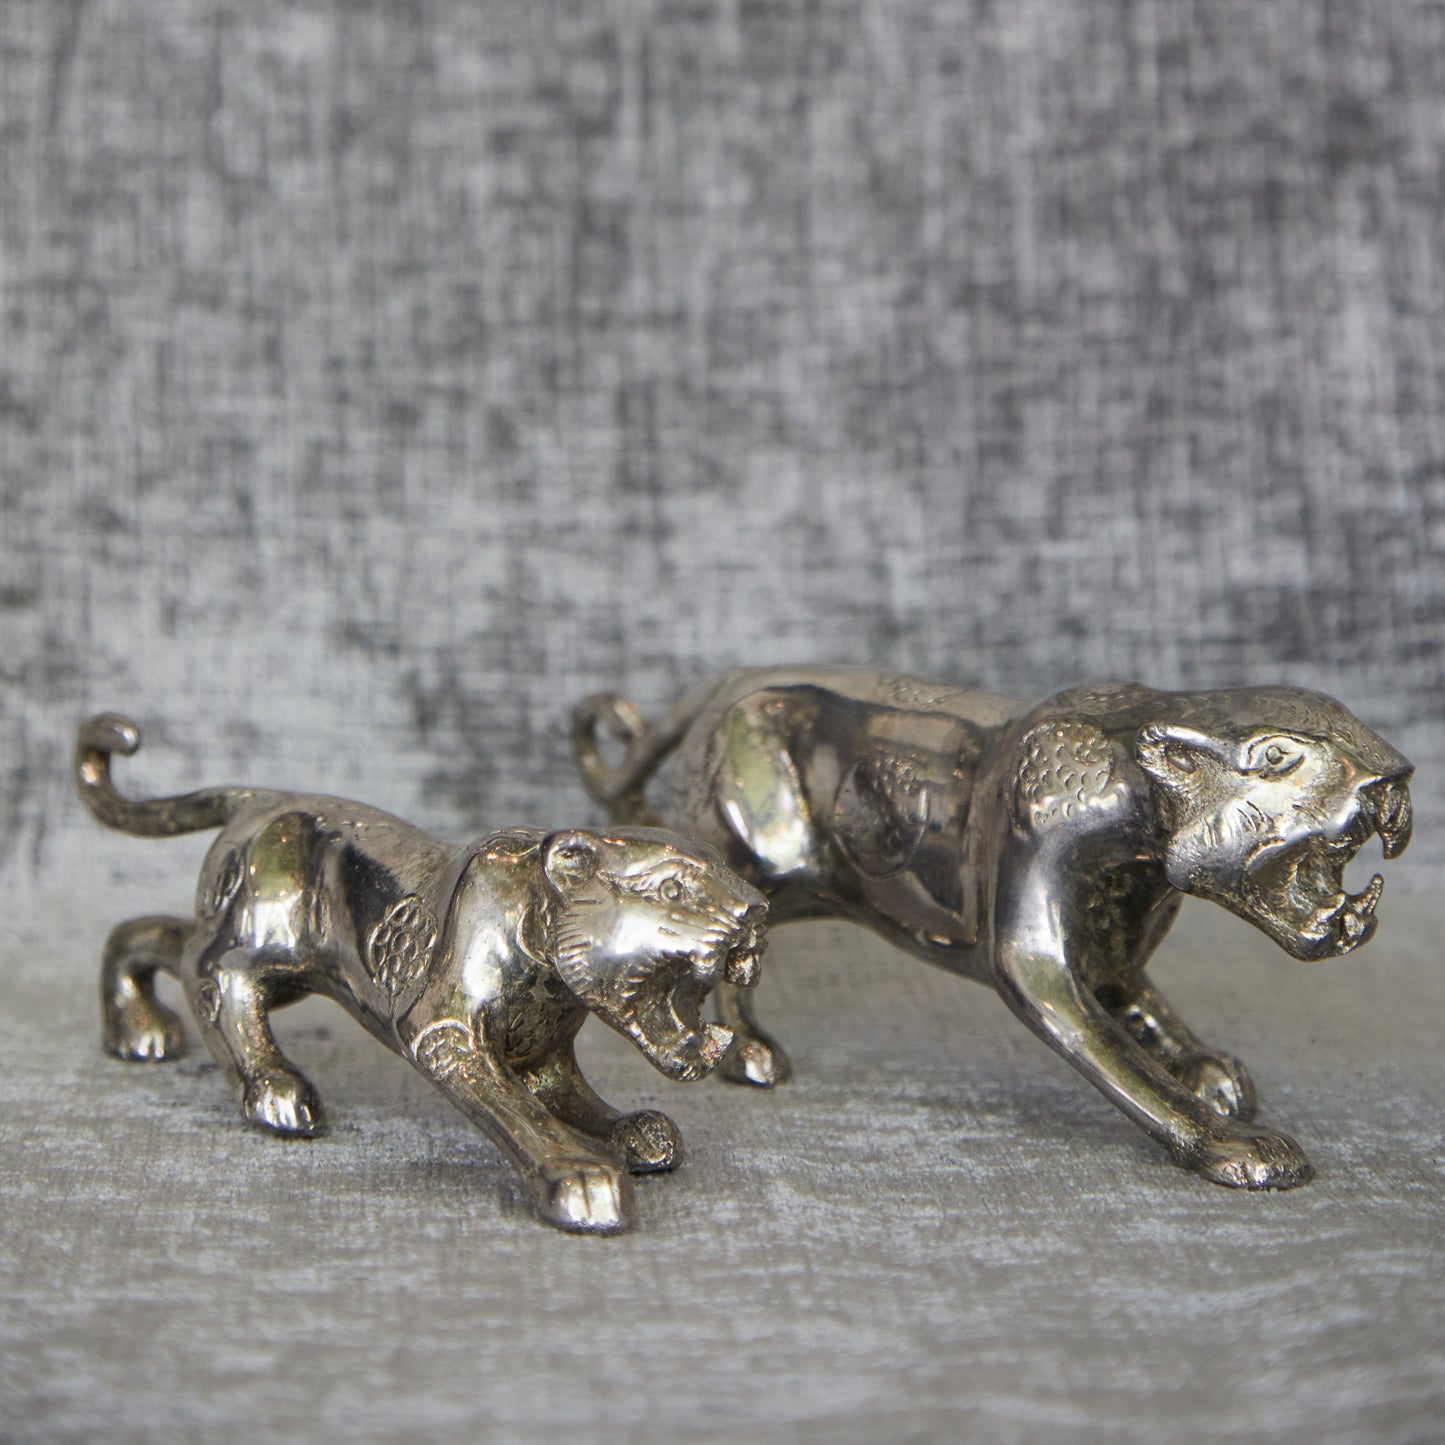 Our Silver Jaguars Are The Perfect Gift This Diwali Season. Made Of A Brass Base With Silver Plating On Top. 